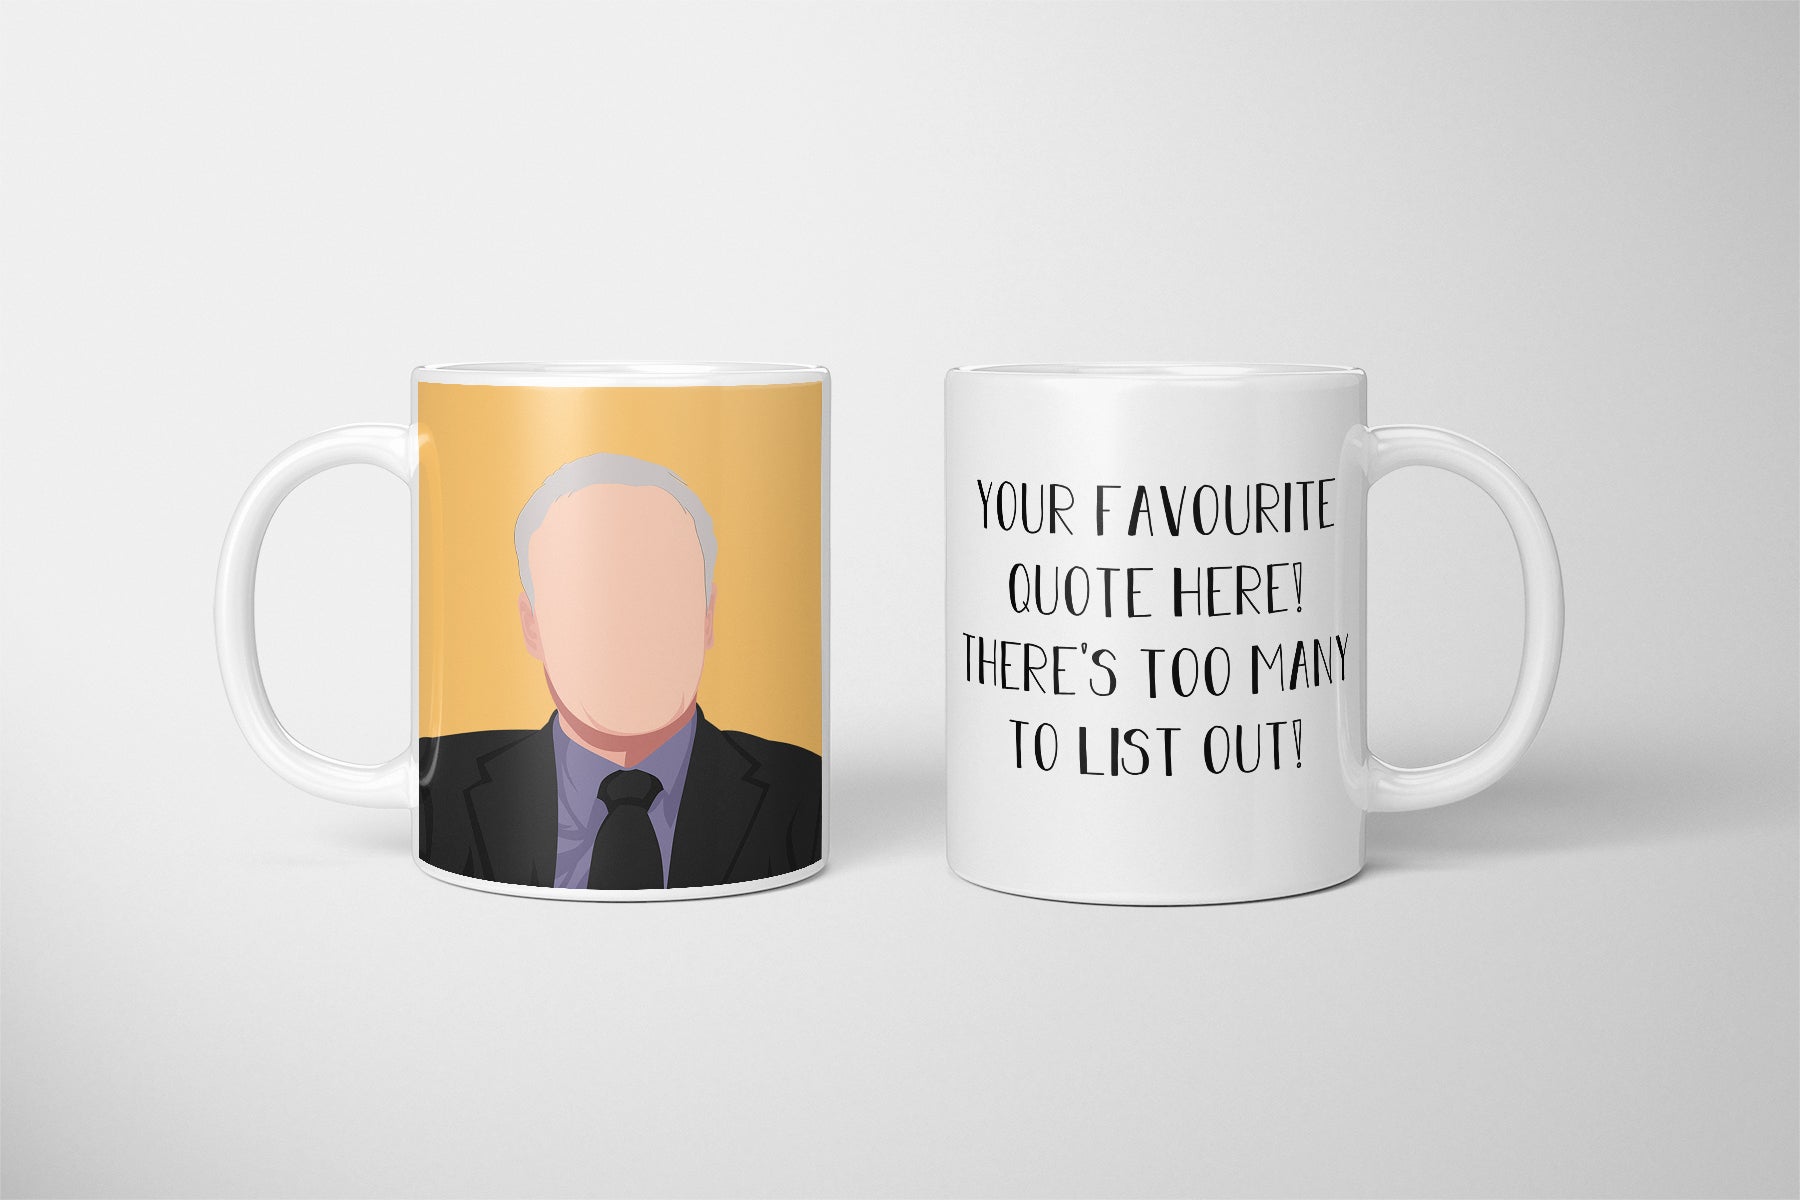 Creed Bratton Quote Mug, Creed Office Personalised Quote Mug, Creed Bratton Fan, Creed Quotes, Creed Cult Quote - The Office US Mug